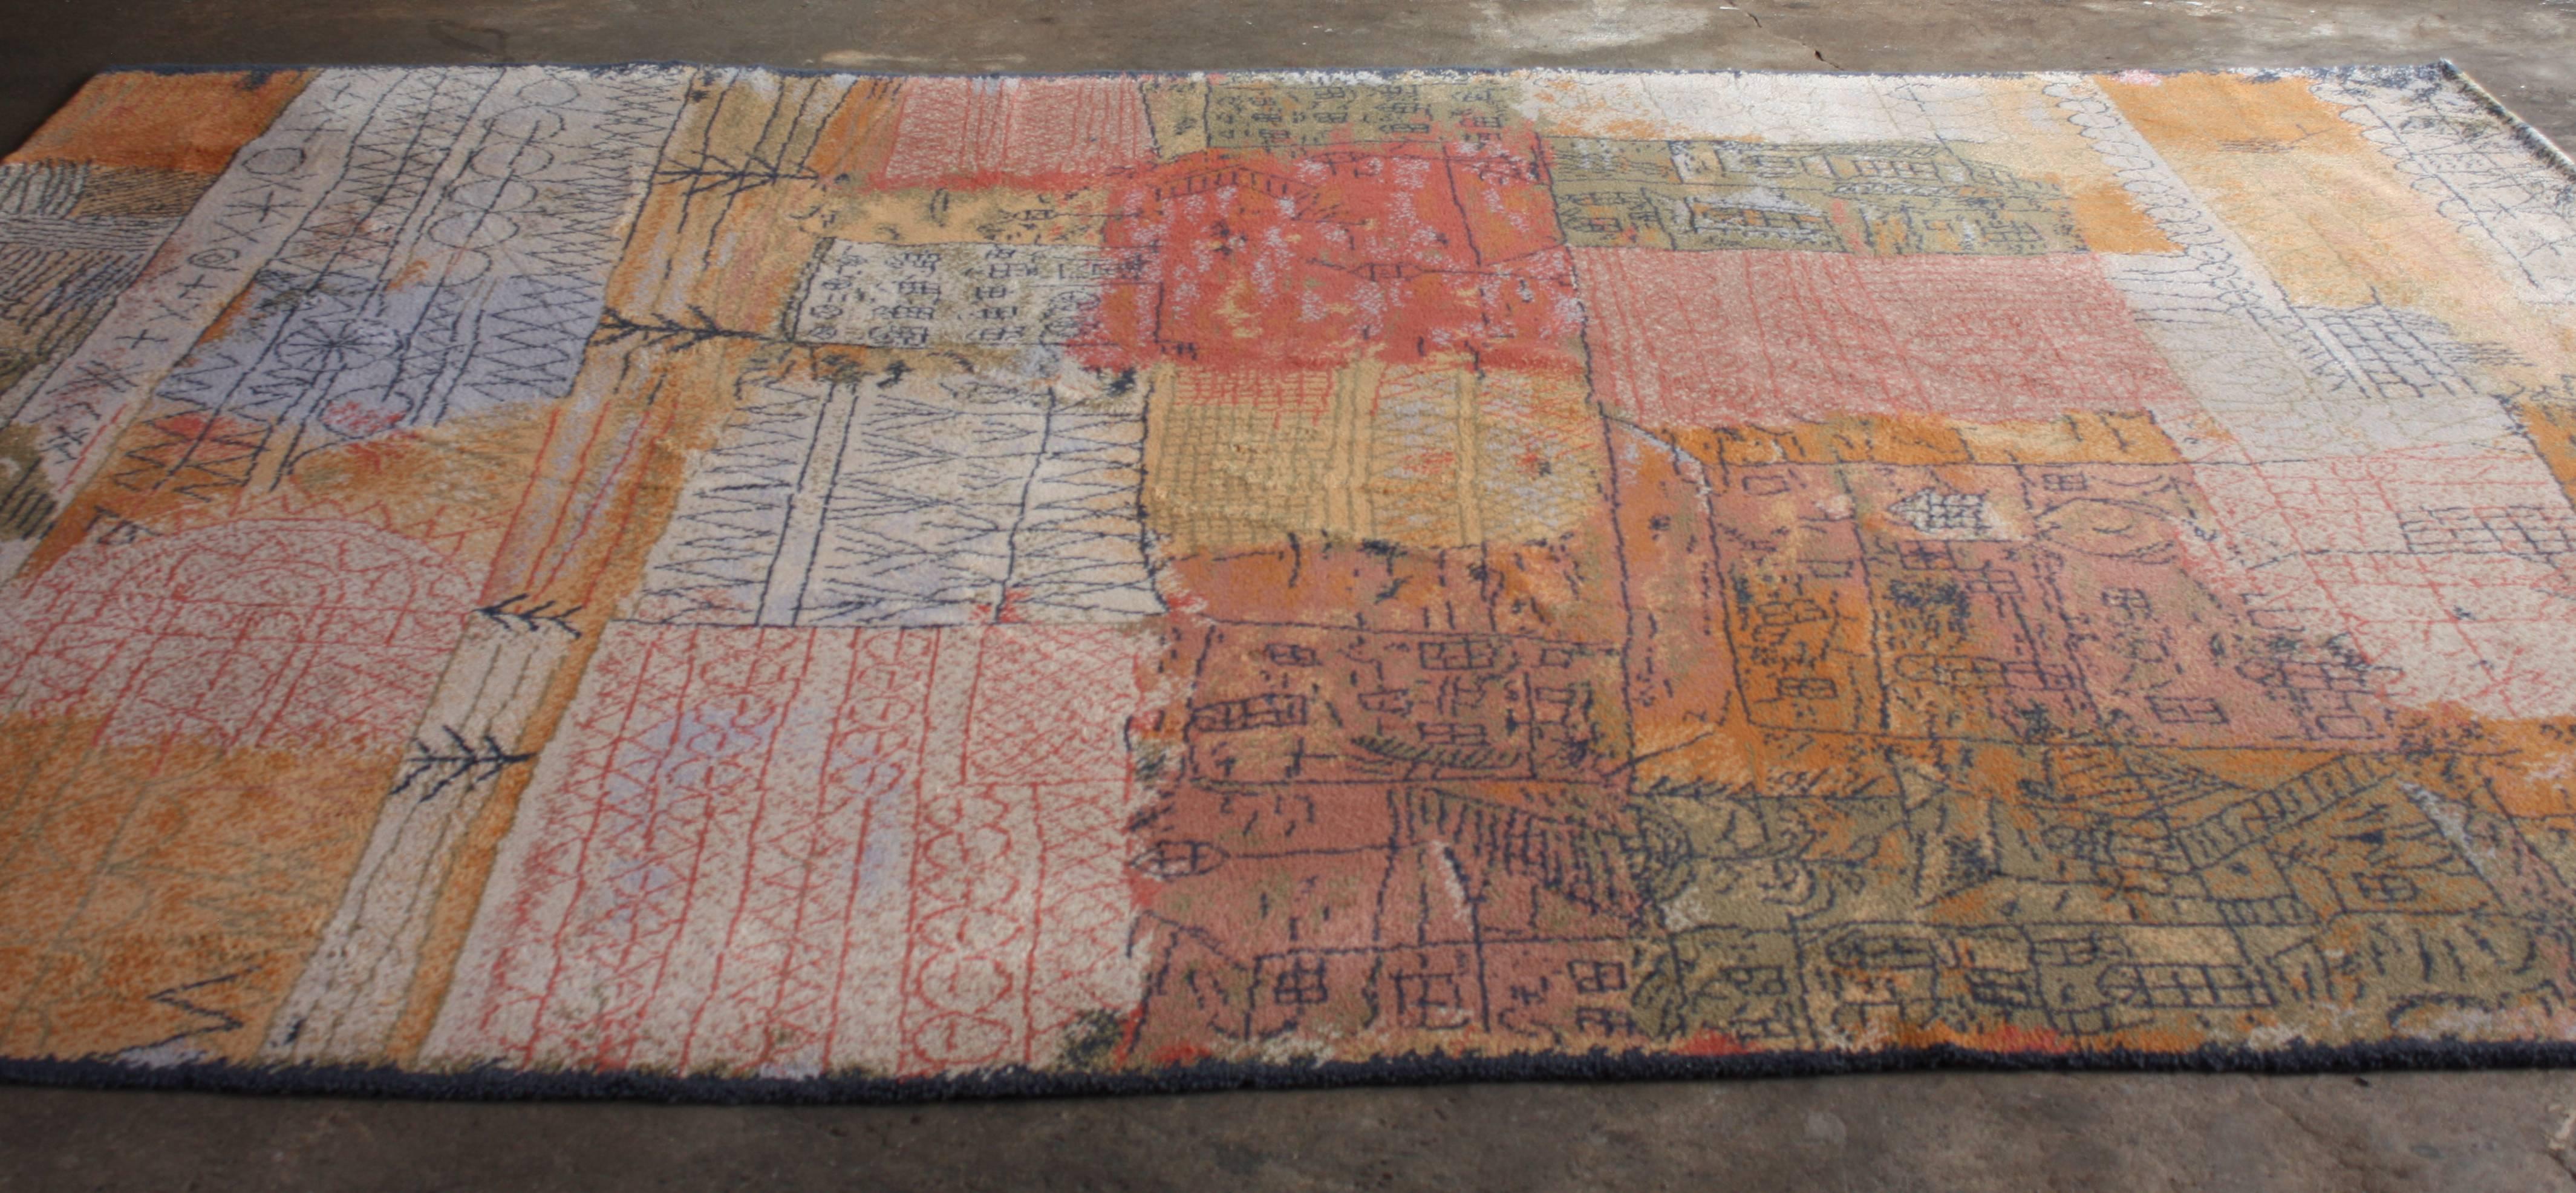 Wool Large Rug by Ege Axminster A/S, Denmark, after Paul Klee